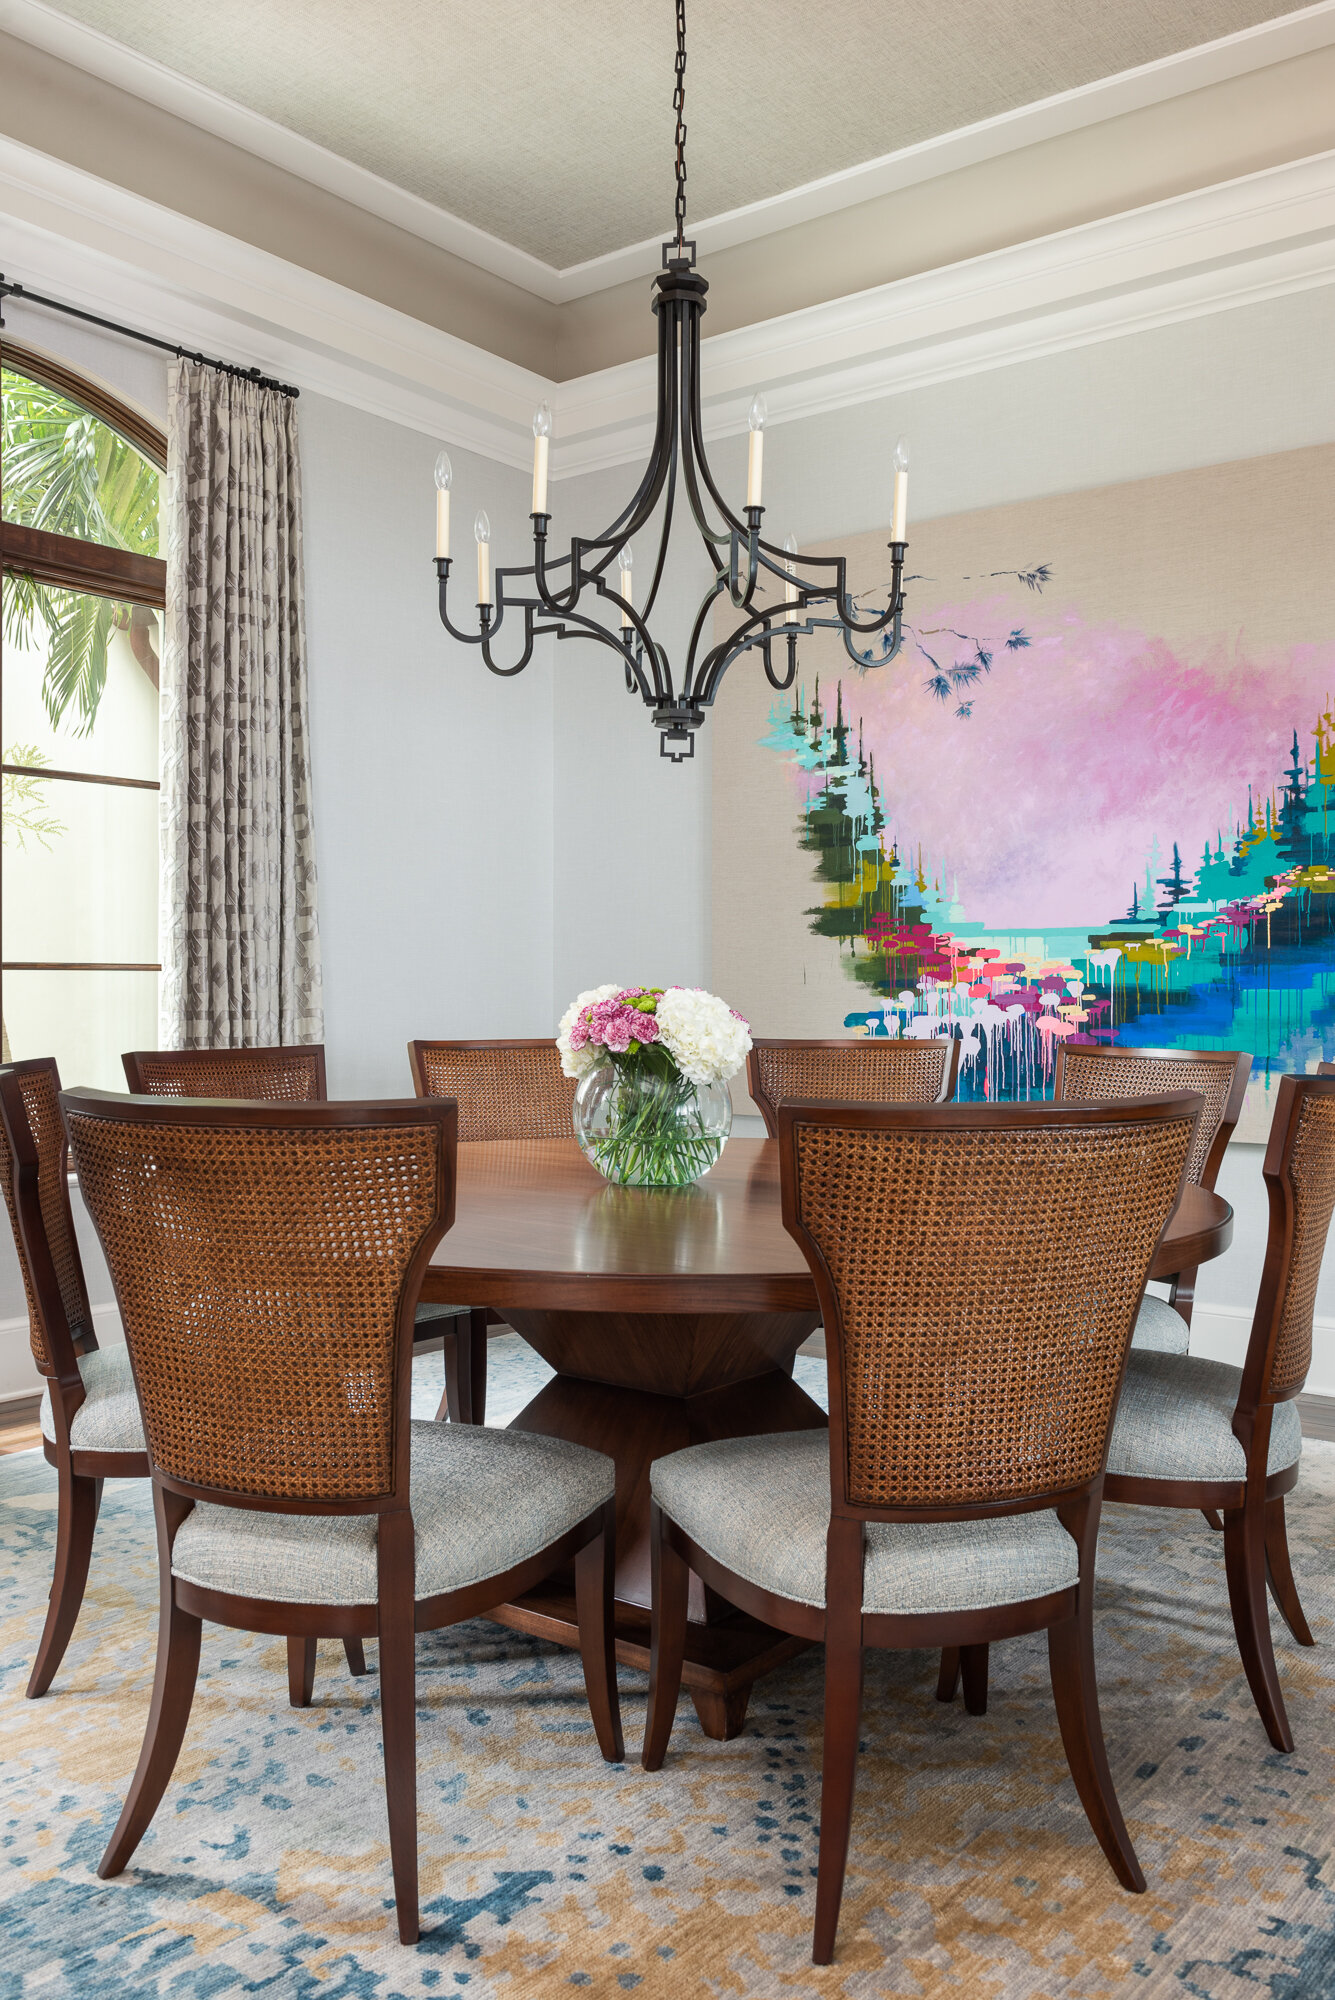 Dining room simple black chandelier colorful art and wood dining table